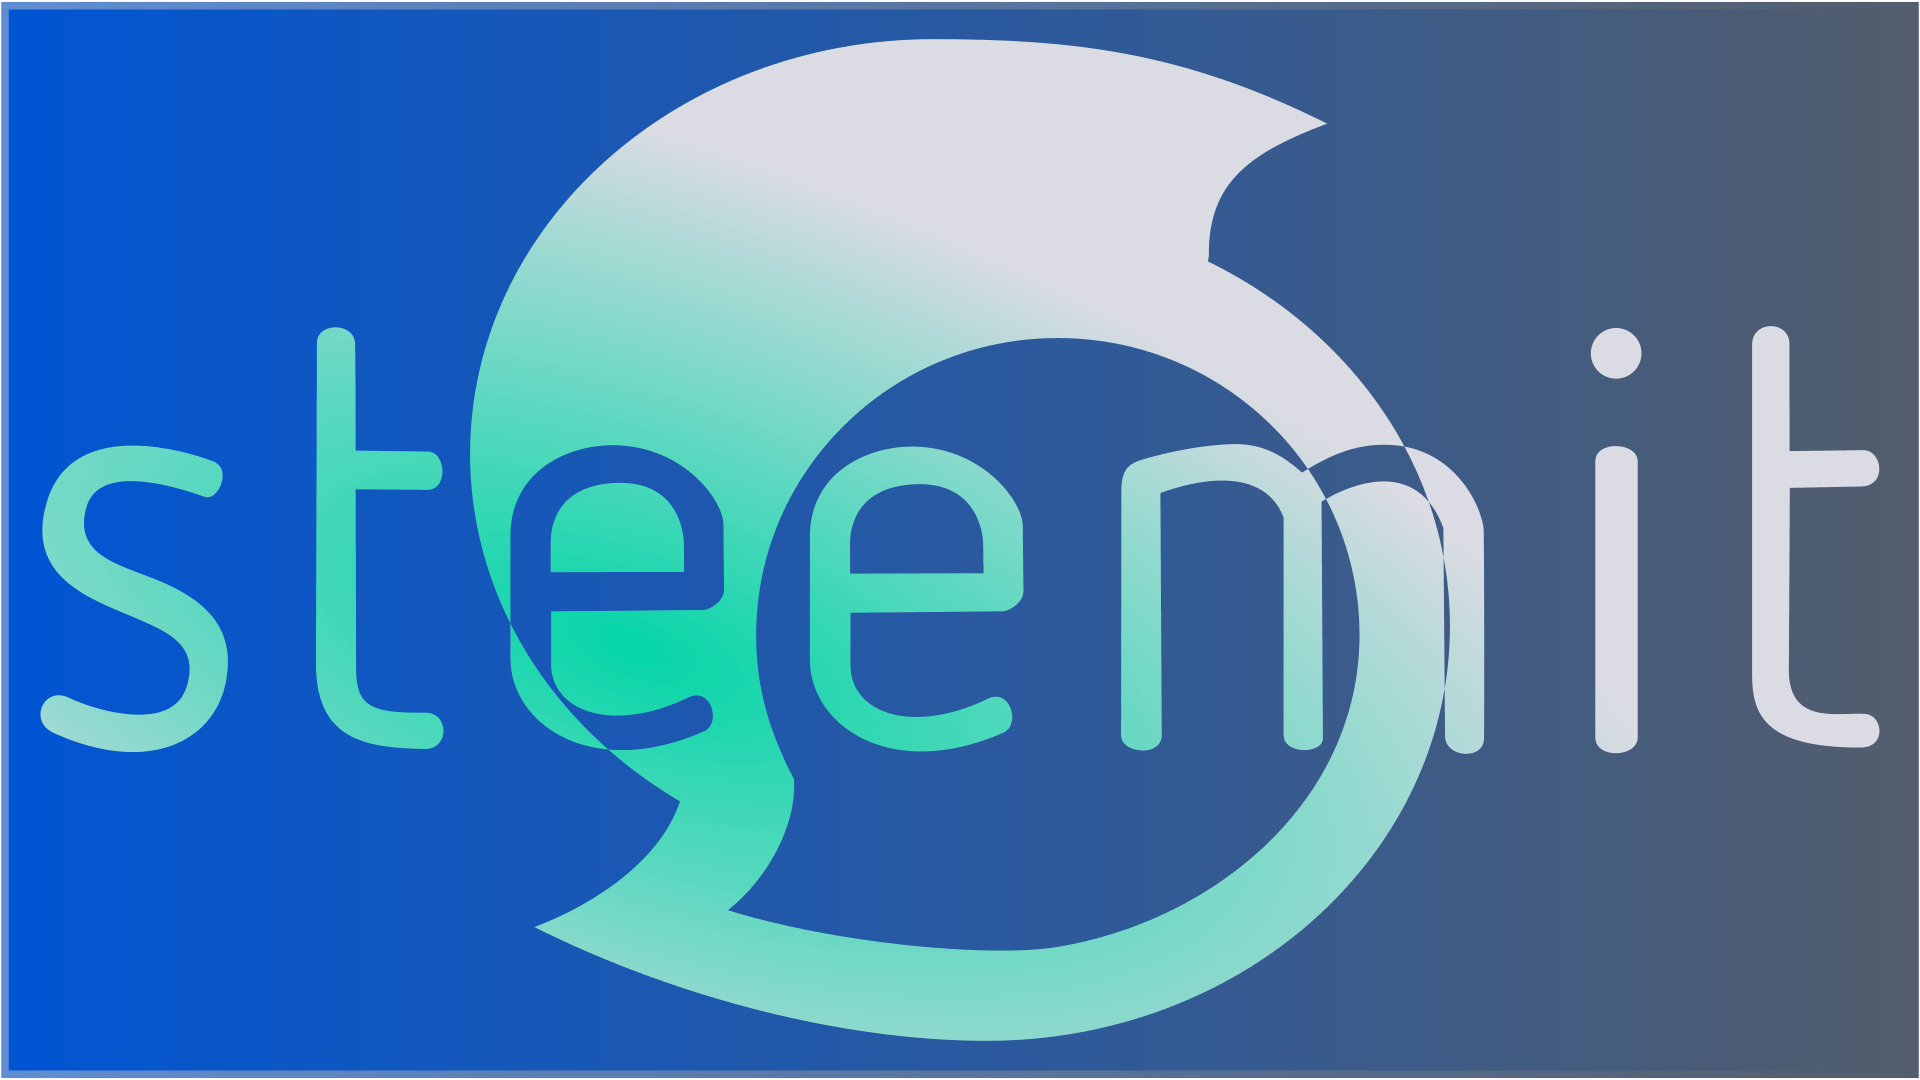 Steemit Logo - Drawing The New Steemit Logo With Inkscape - Free Graphics To Use ...